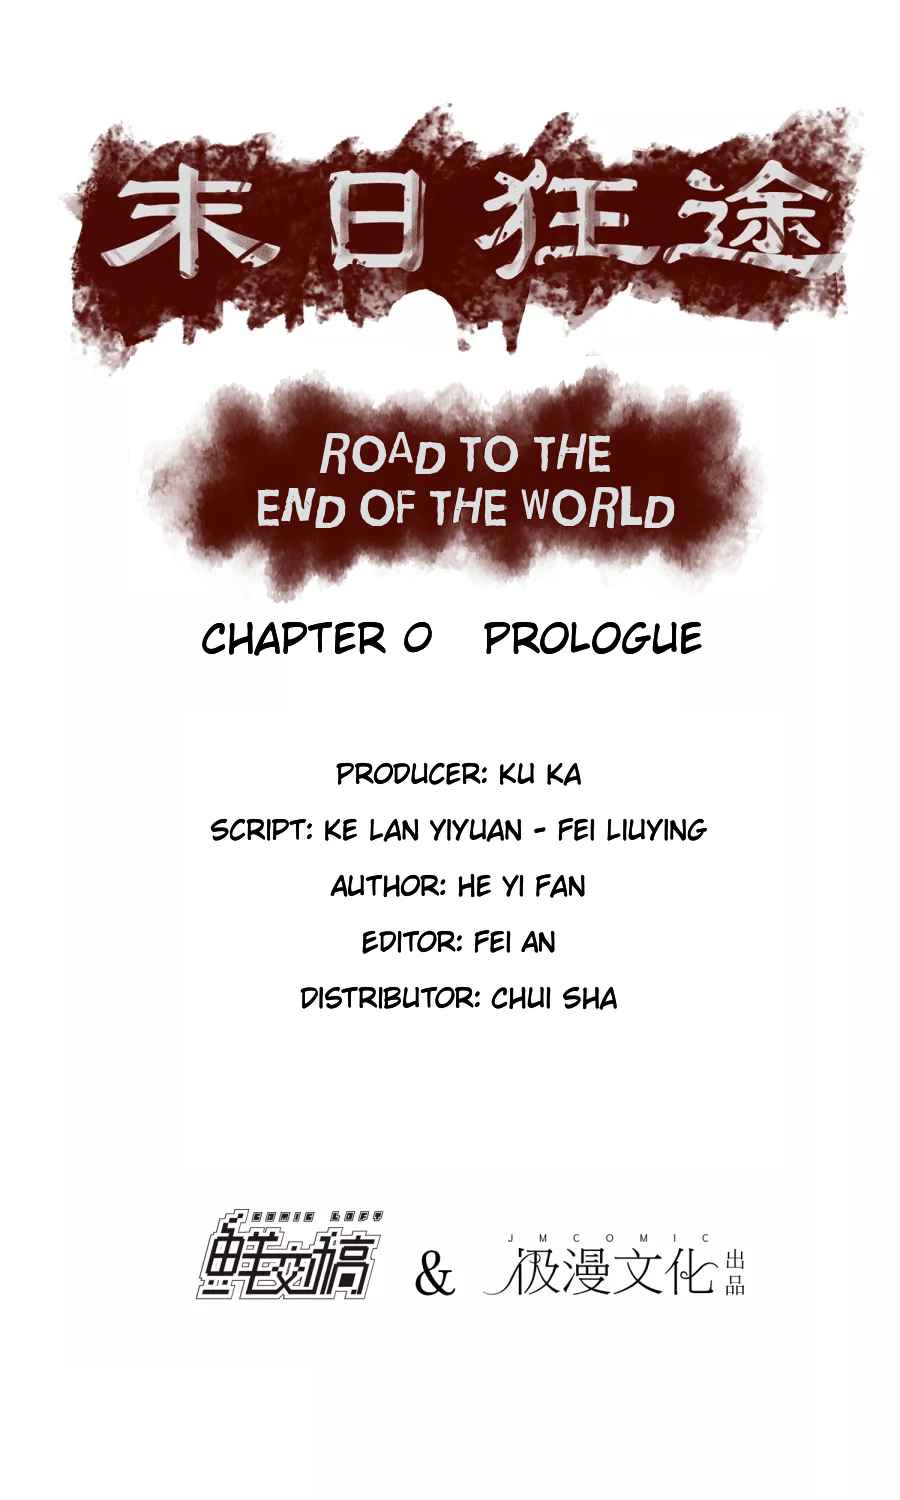 Road to the End of the World Ch. 0 Prologue